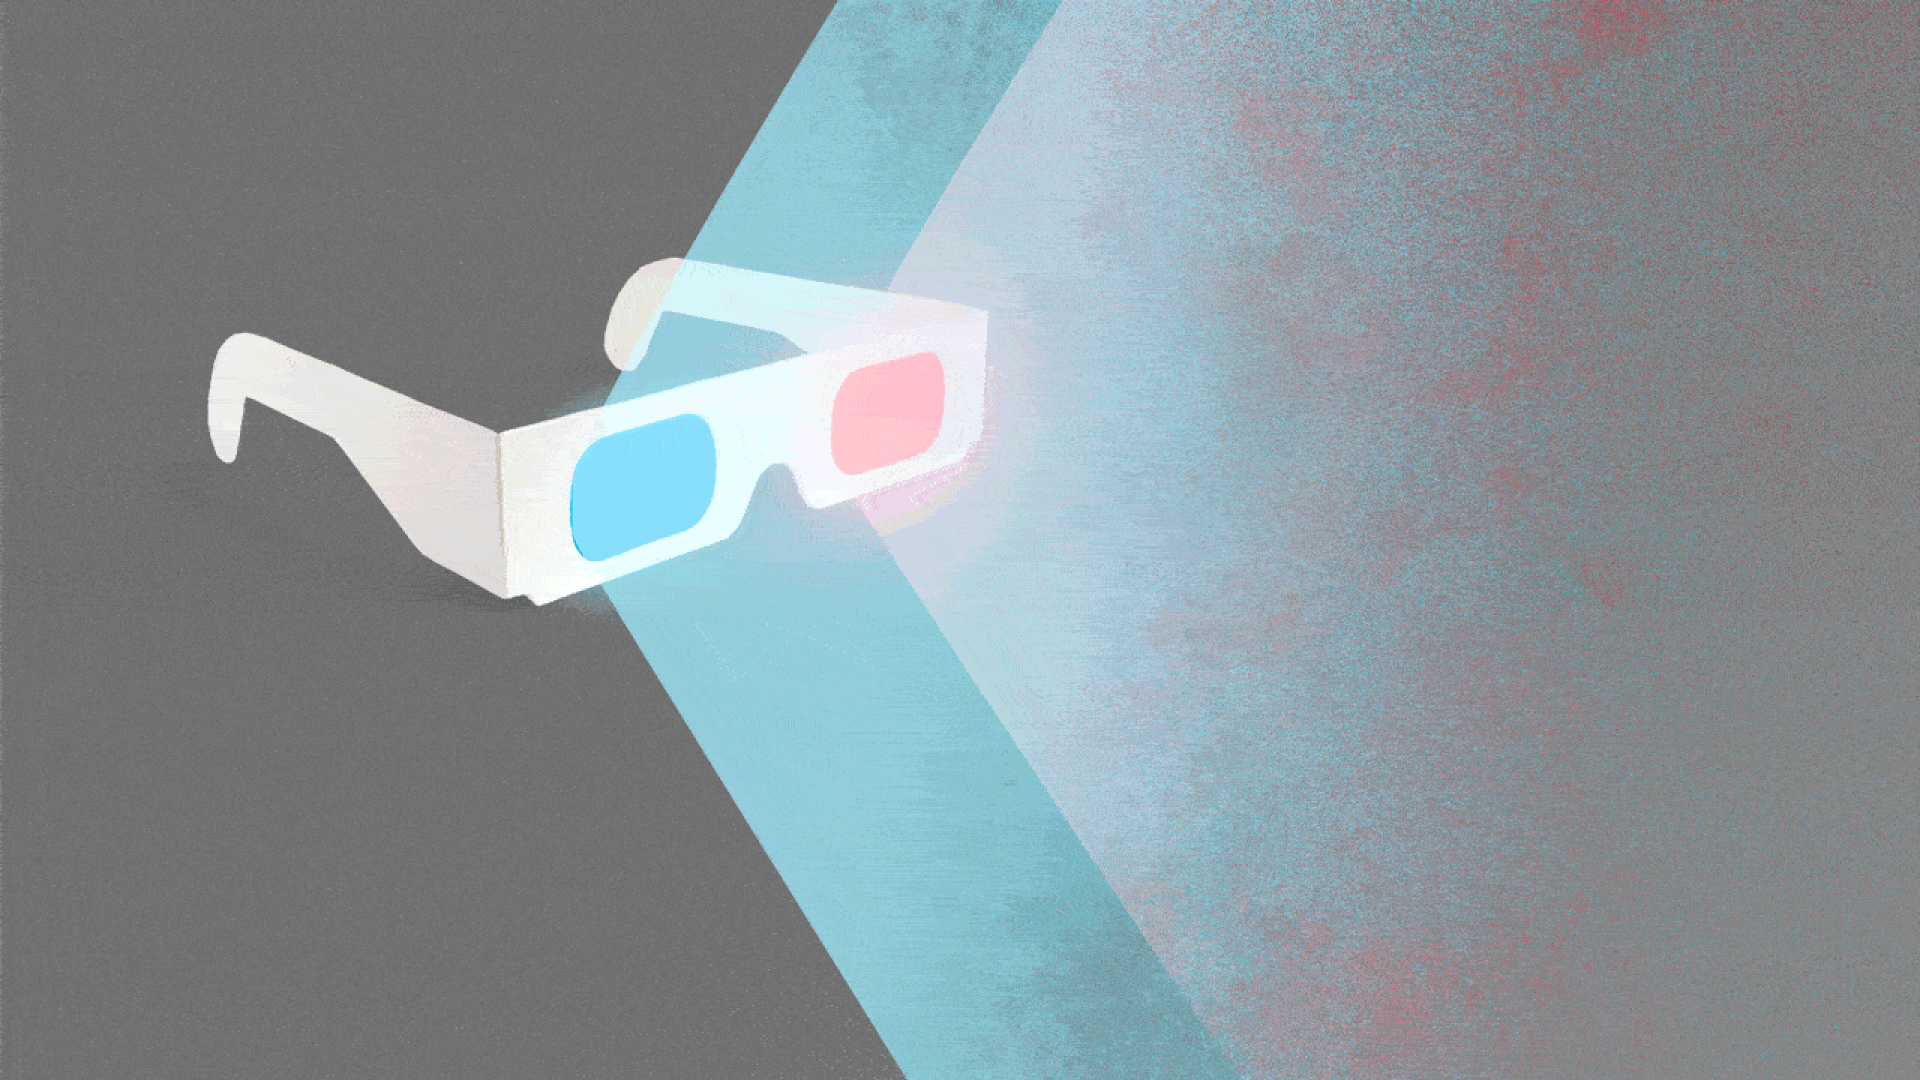  Animated illustration of 3D glasses projecting light